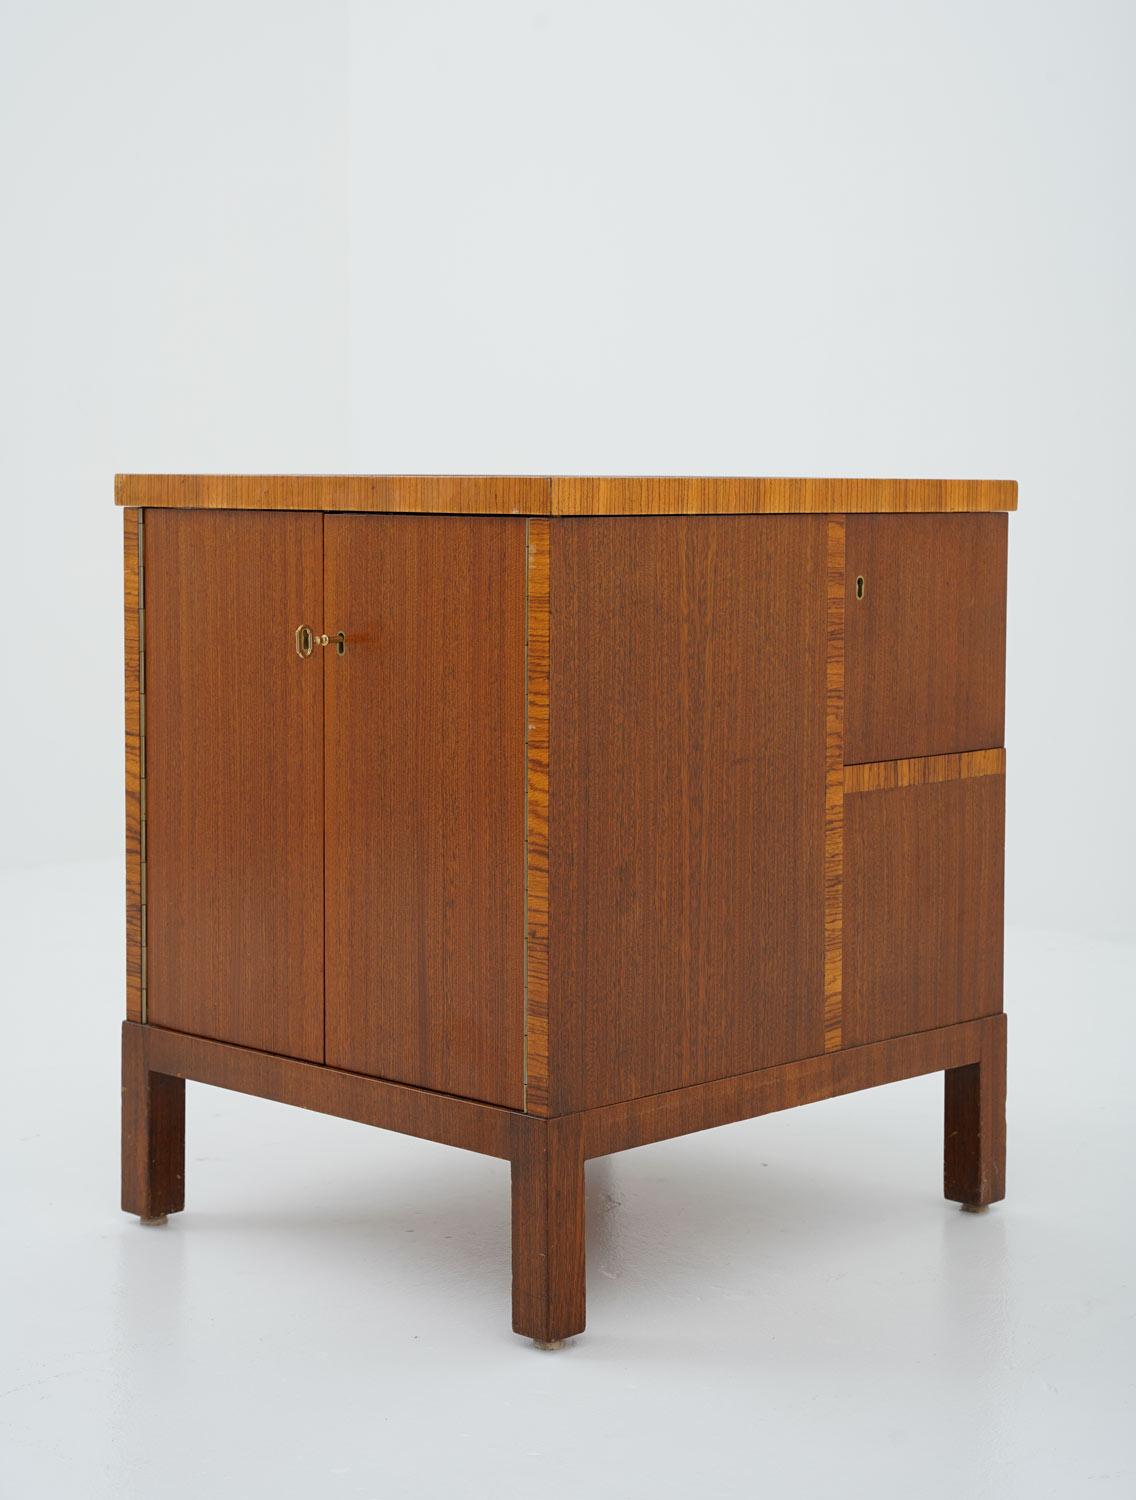 Elegant side table or bar table manufactured in Sweden, 1930s.
This table is made with impressive craftsmanship. The sides of the table offer several shelves and lockers and are veneered with mahogany and Zebrano. On the tabletop, you will find